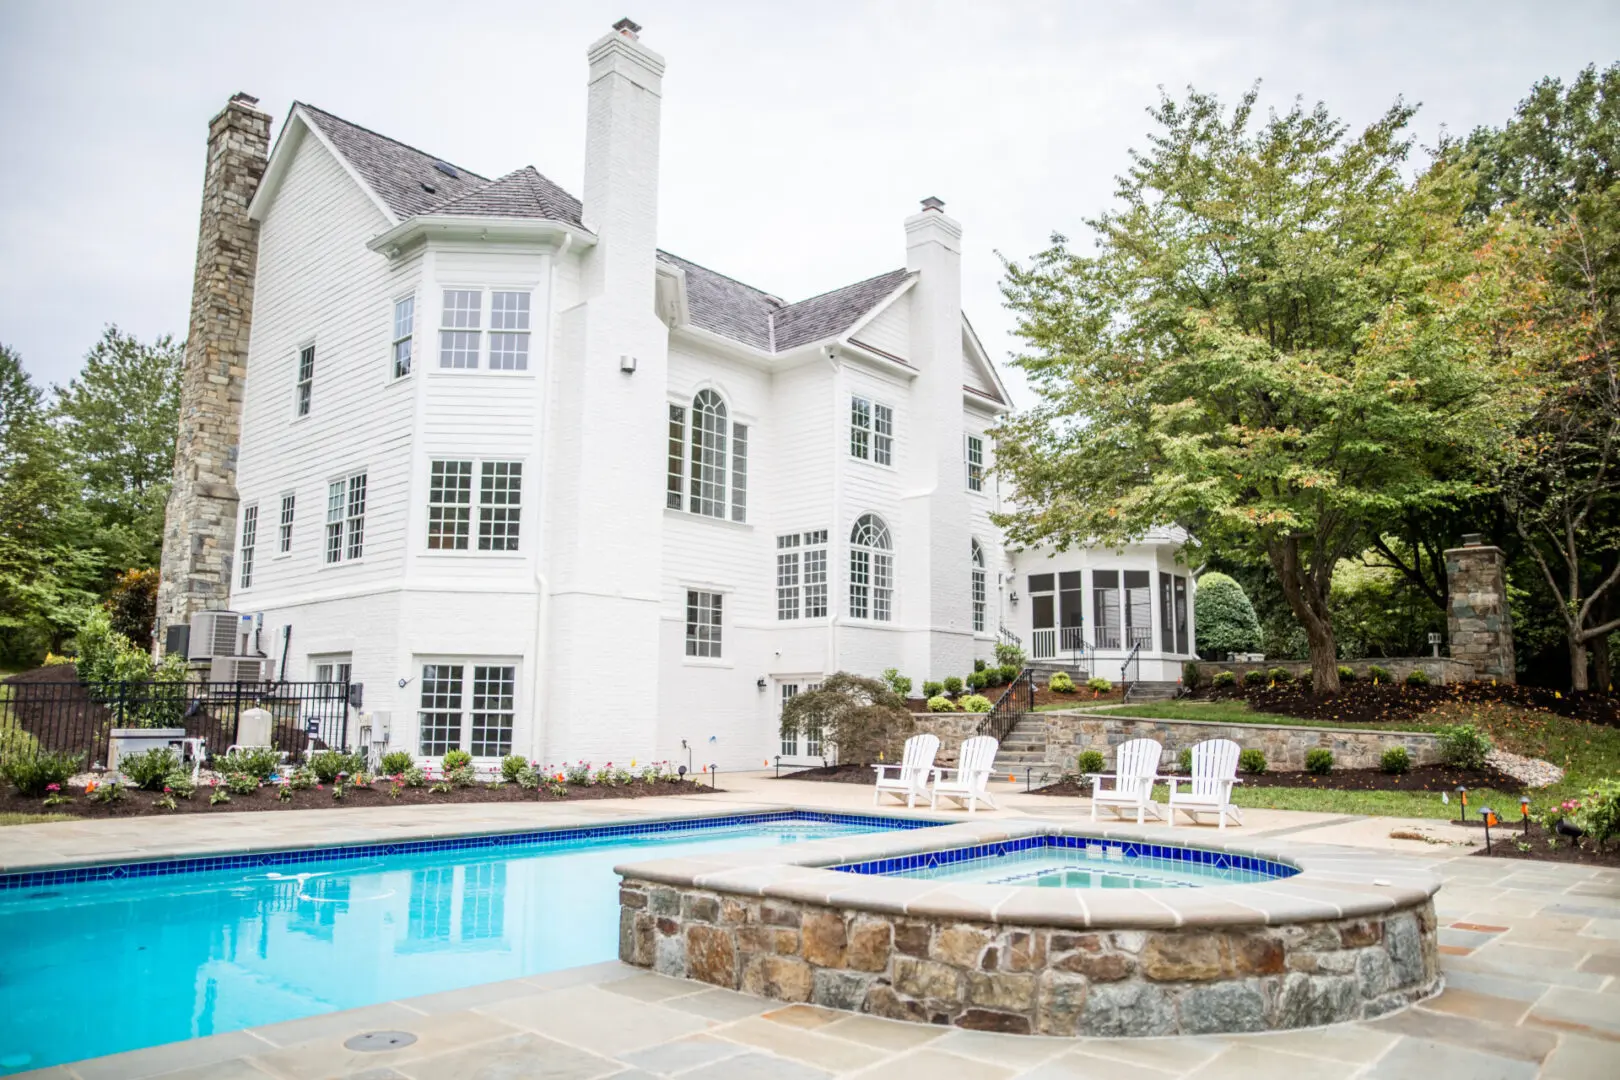 A large white house with a pool and hot tub.